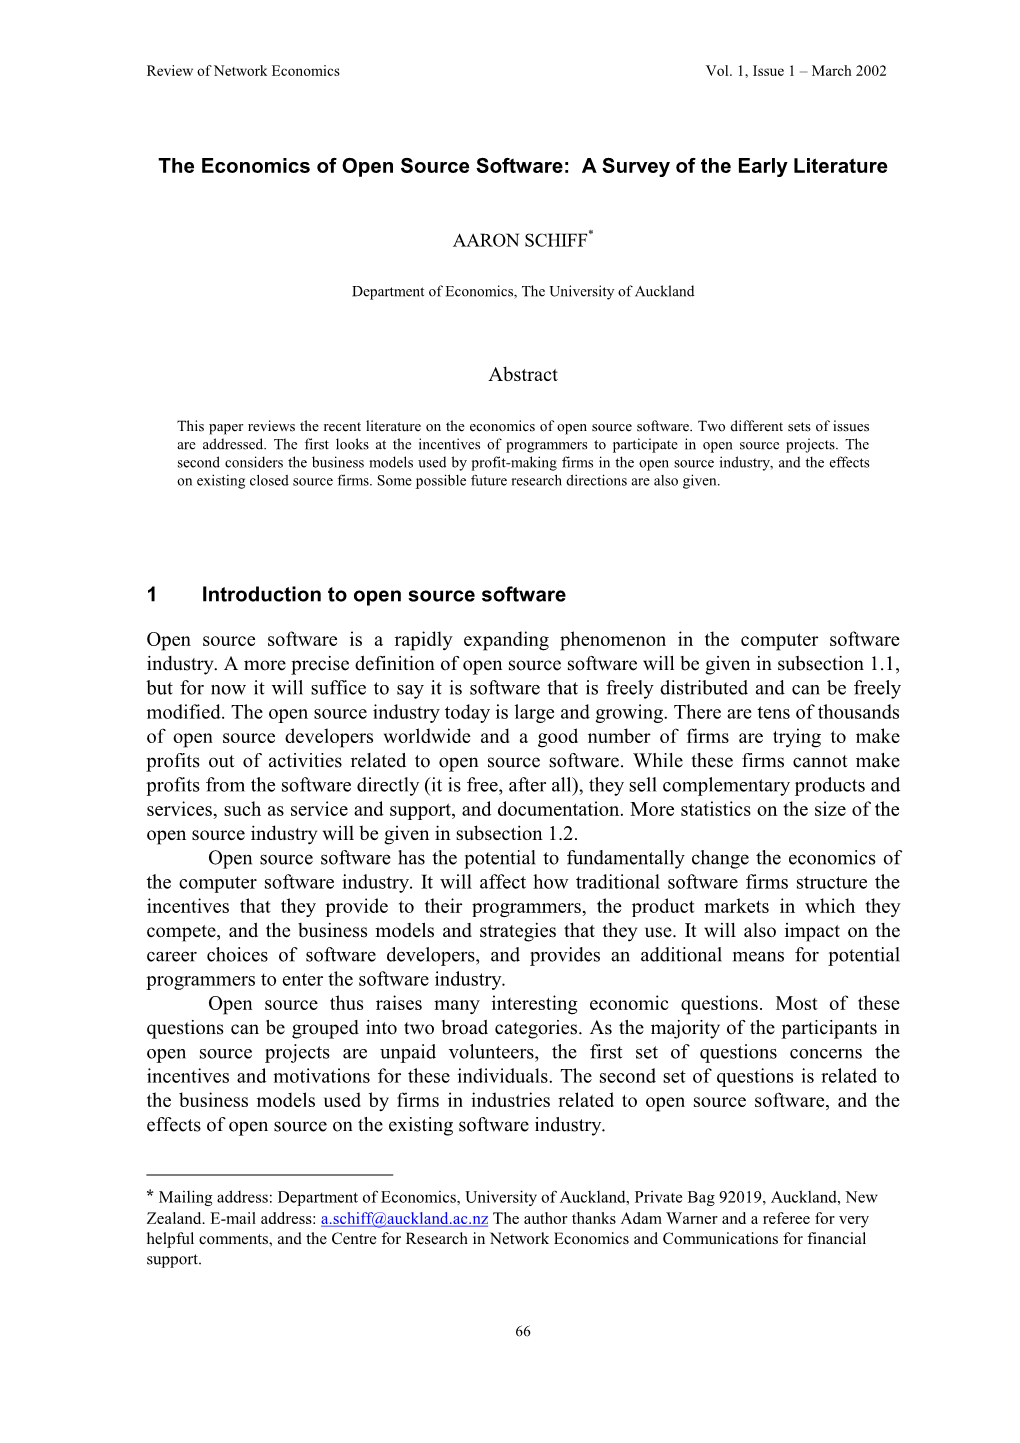 The Economics of Open Source Software: a Survey of the Early Literature